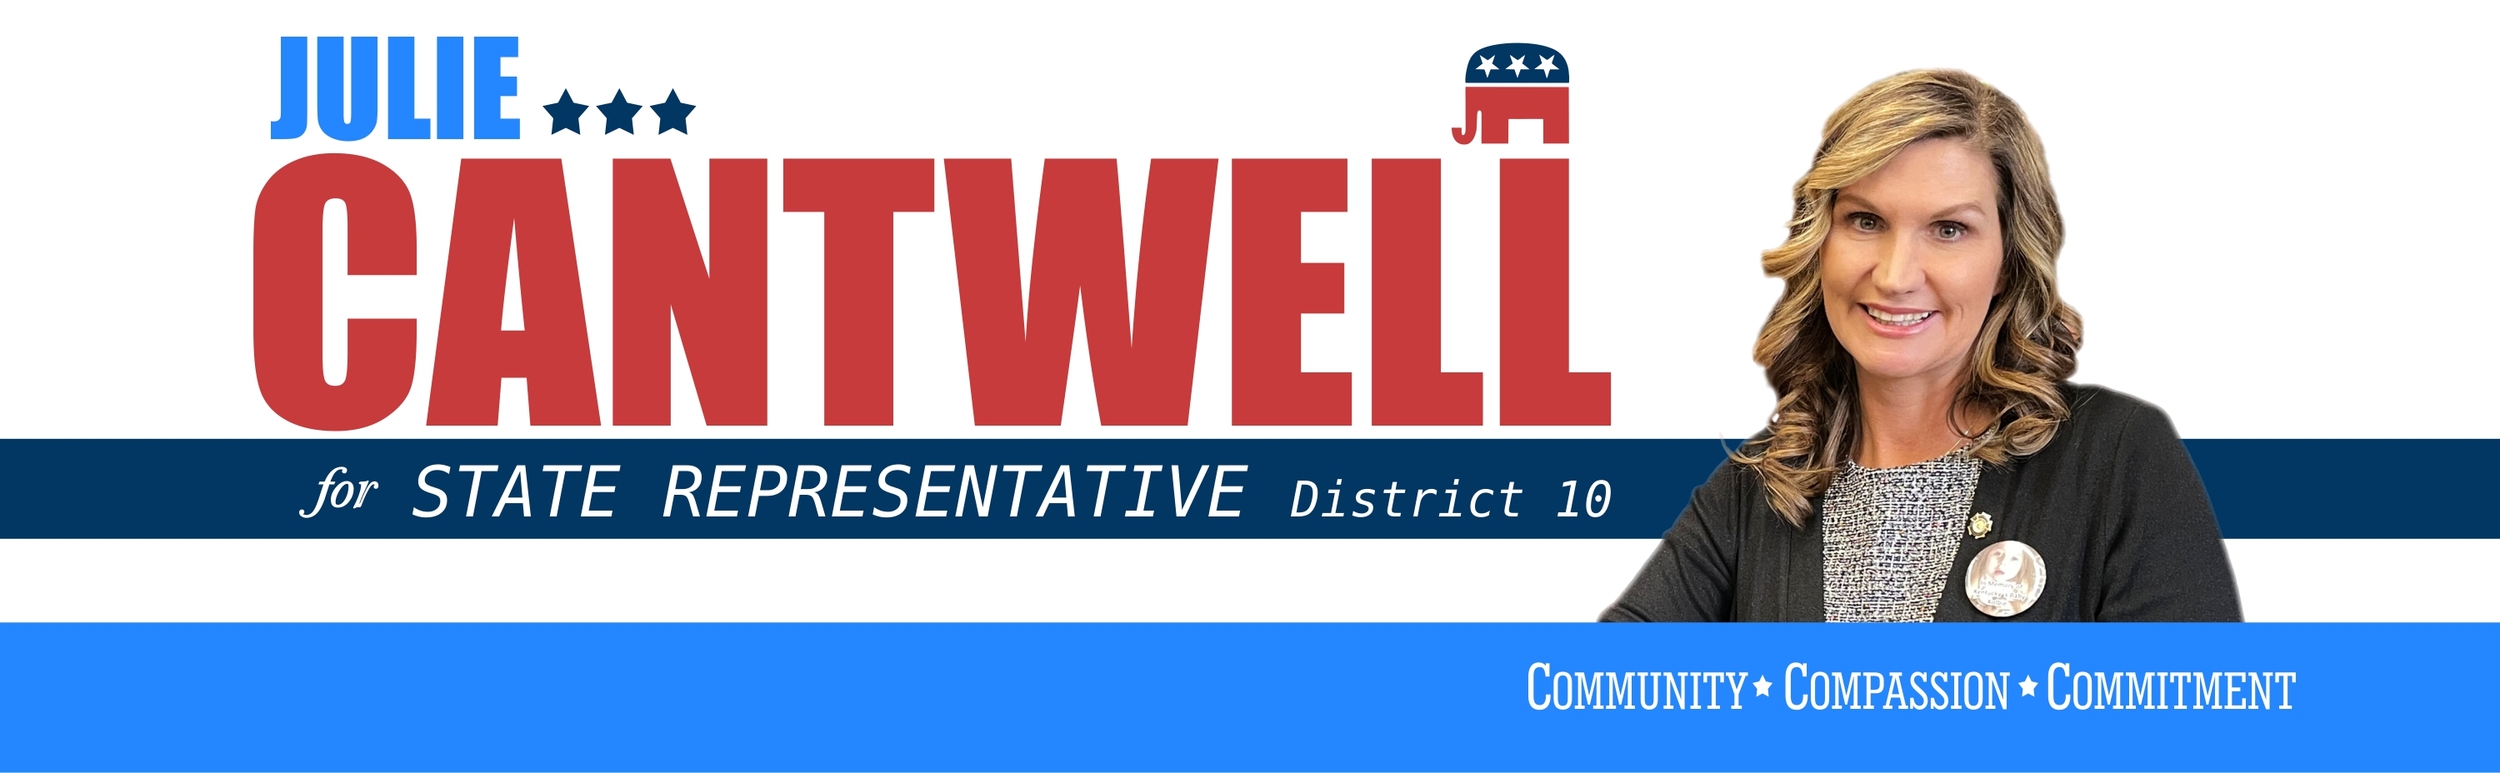 vote julie cantwell